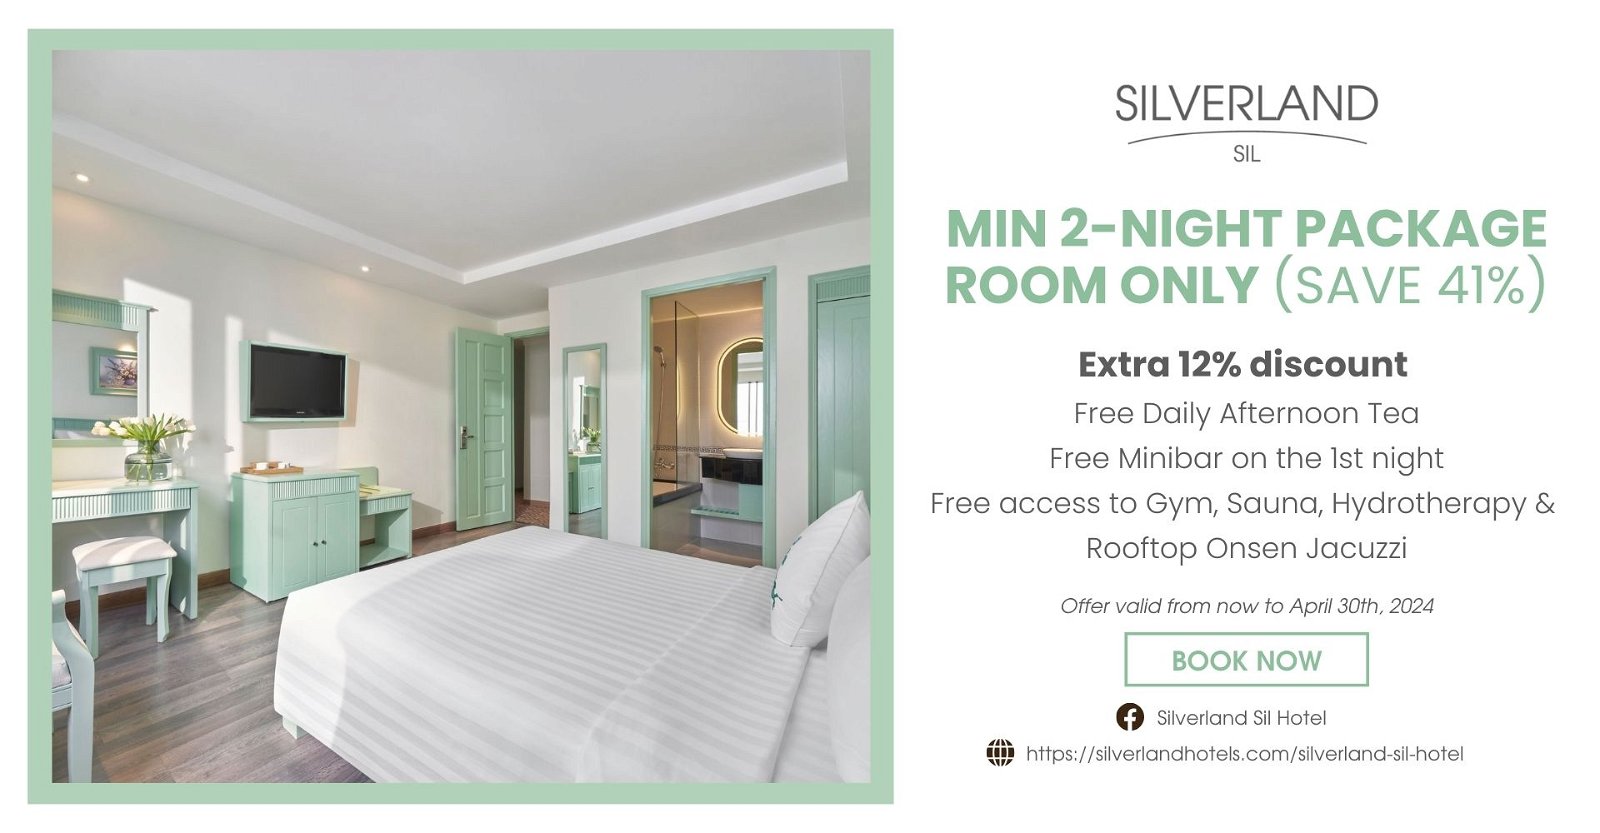 SILVERLAND SIL – MIN 2-NIGHT – ROOM ONLY (SAVE 41%)